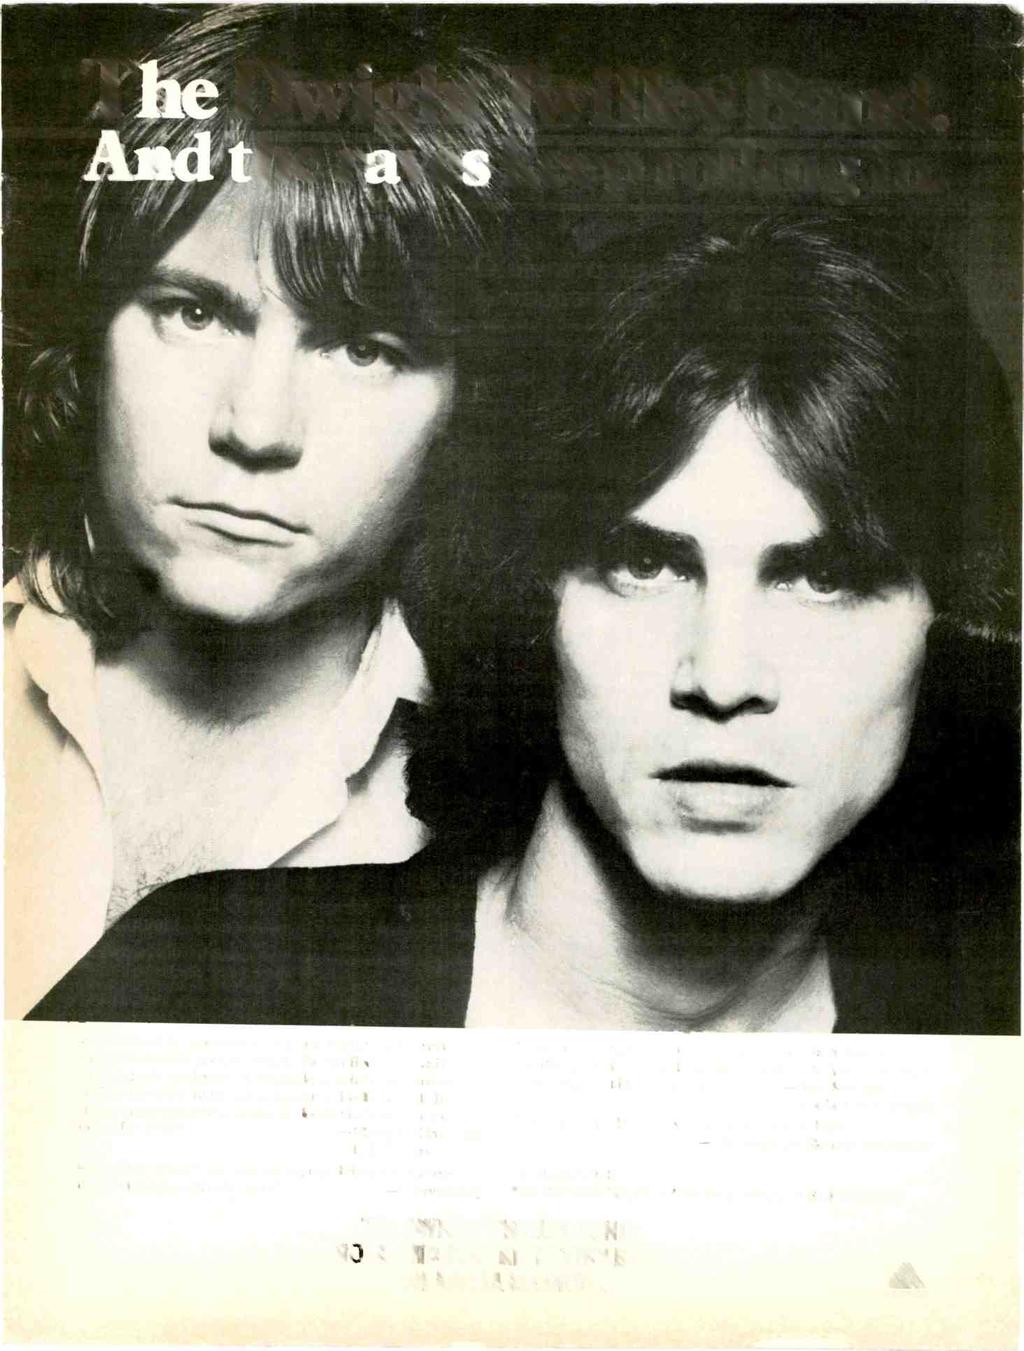 "Last week may be remembered as a lar_dmar_z iz rock's err_- gence with the debut of the Dwight Twilley Bald.